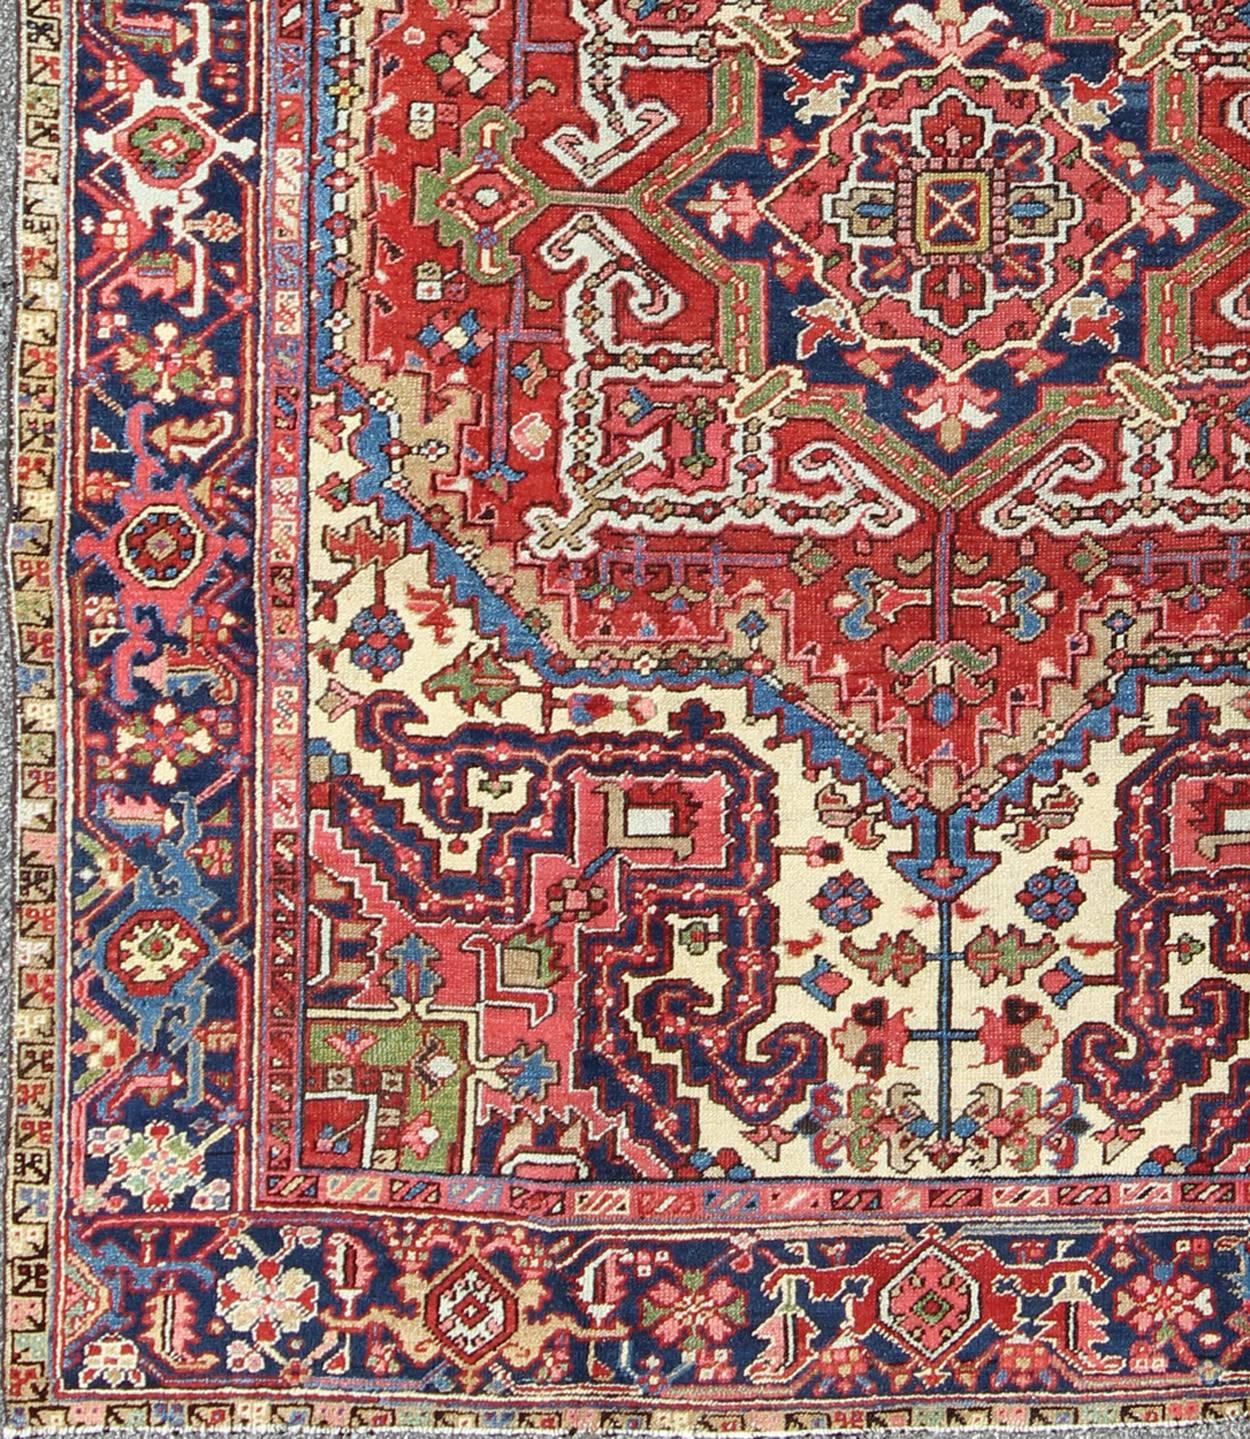 This magnificent antique Persian Heriz carpet from the early 20th century bears an exquisite design rendered in gorgeous, warm hues of red and various shades of blue. A highly stylized geometric center medallion anchors the rug and is surrounded by